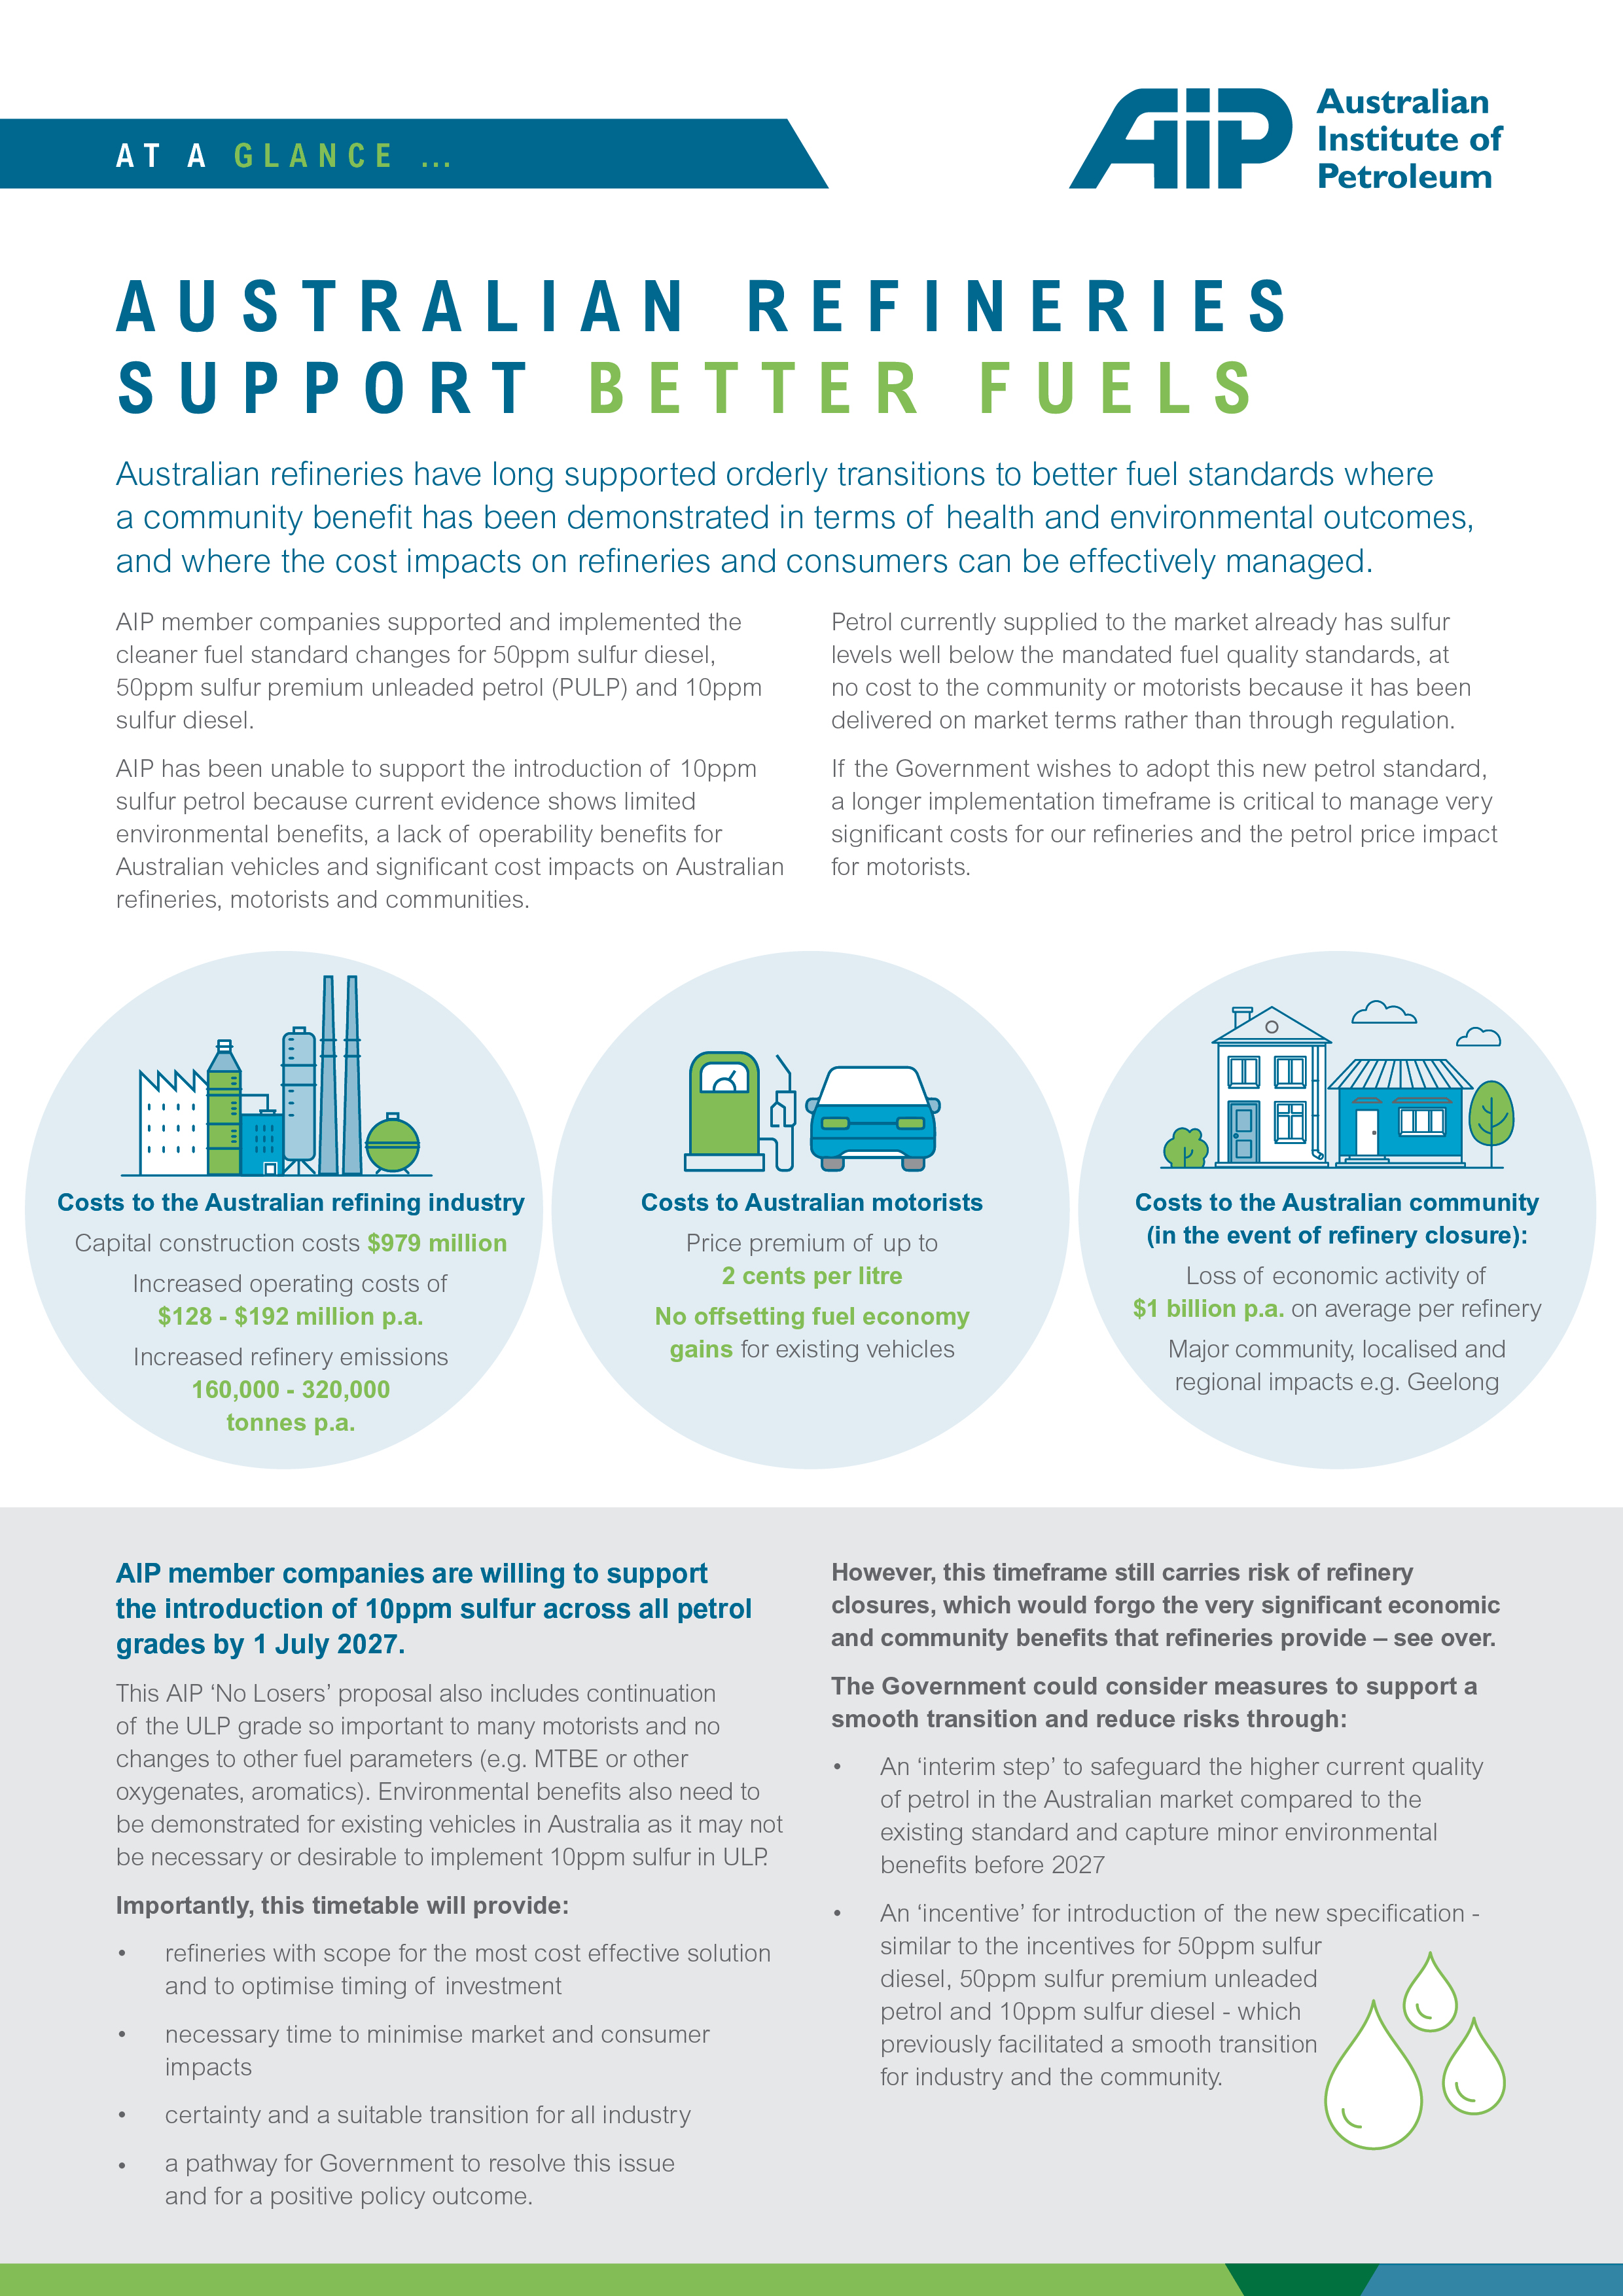 At a Glance: Australian Refineries Support Better Fuels